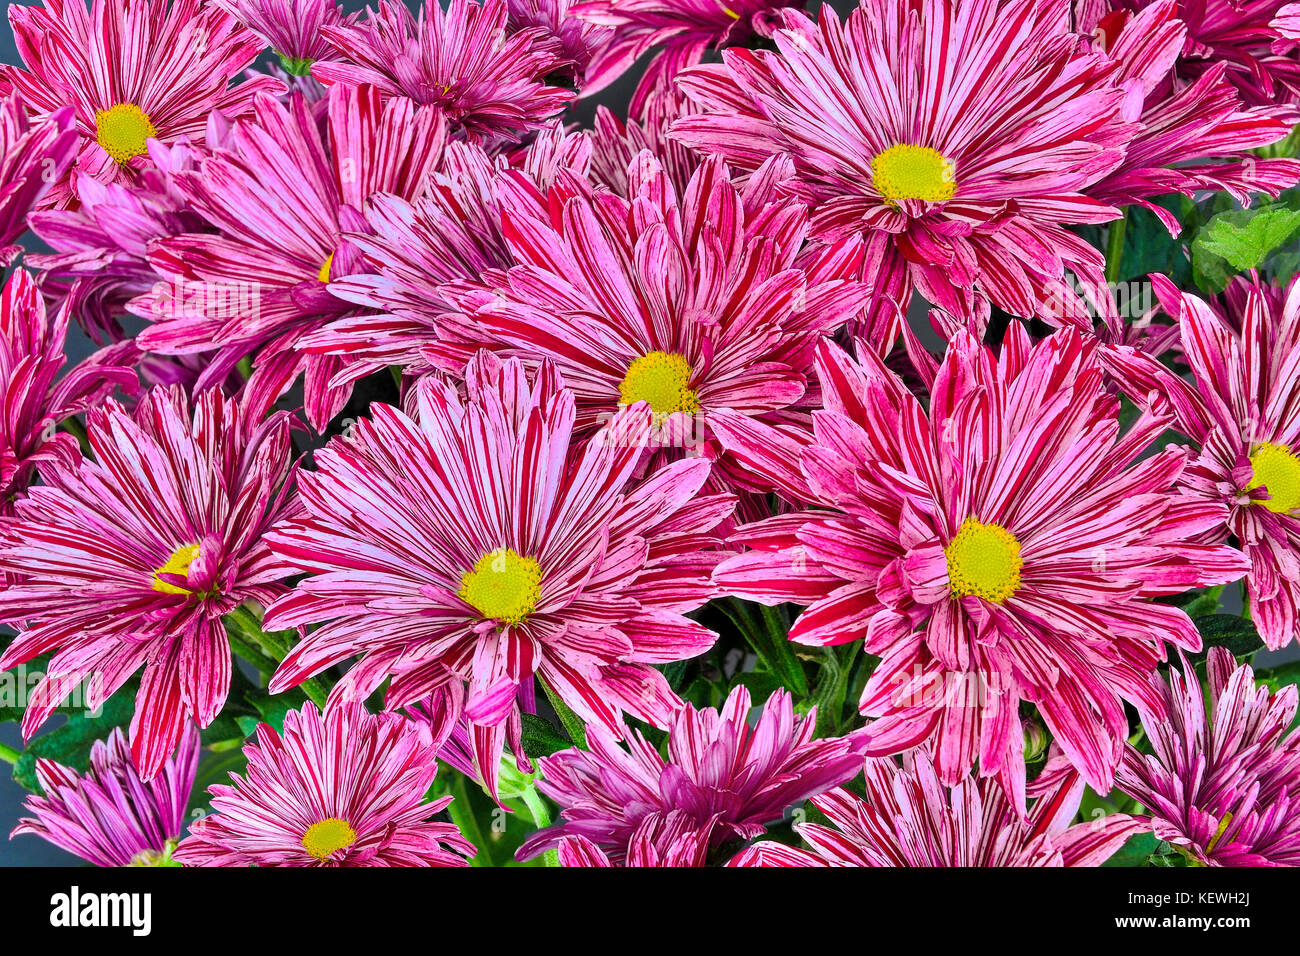 Beautiful floral background - multicolored chrysanthemum flowers bouquet with pink, purple and white stripes on petals close up Stock Photo